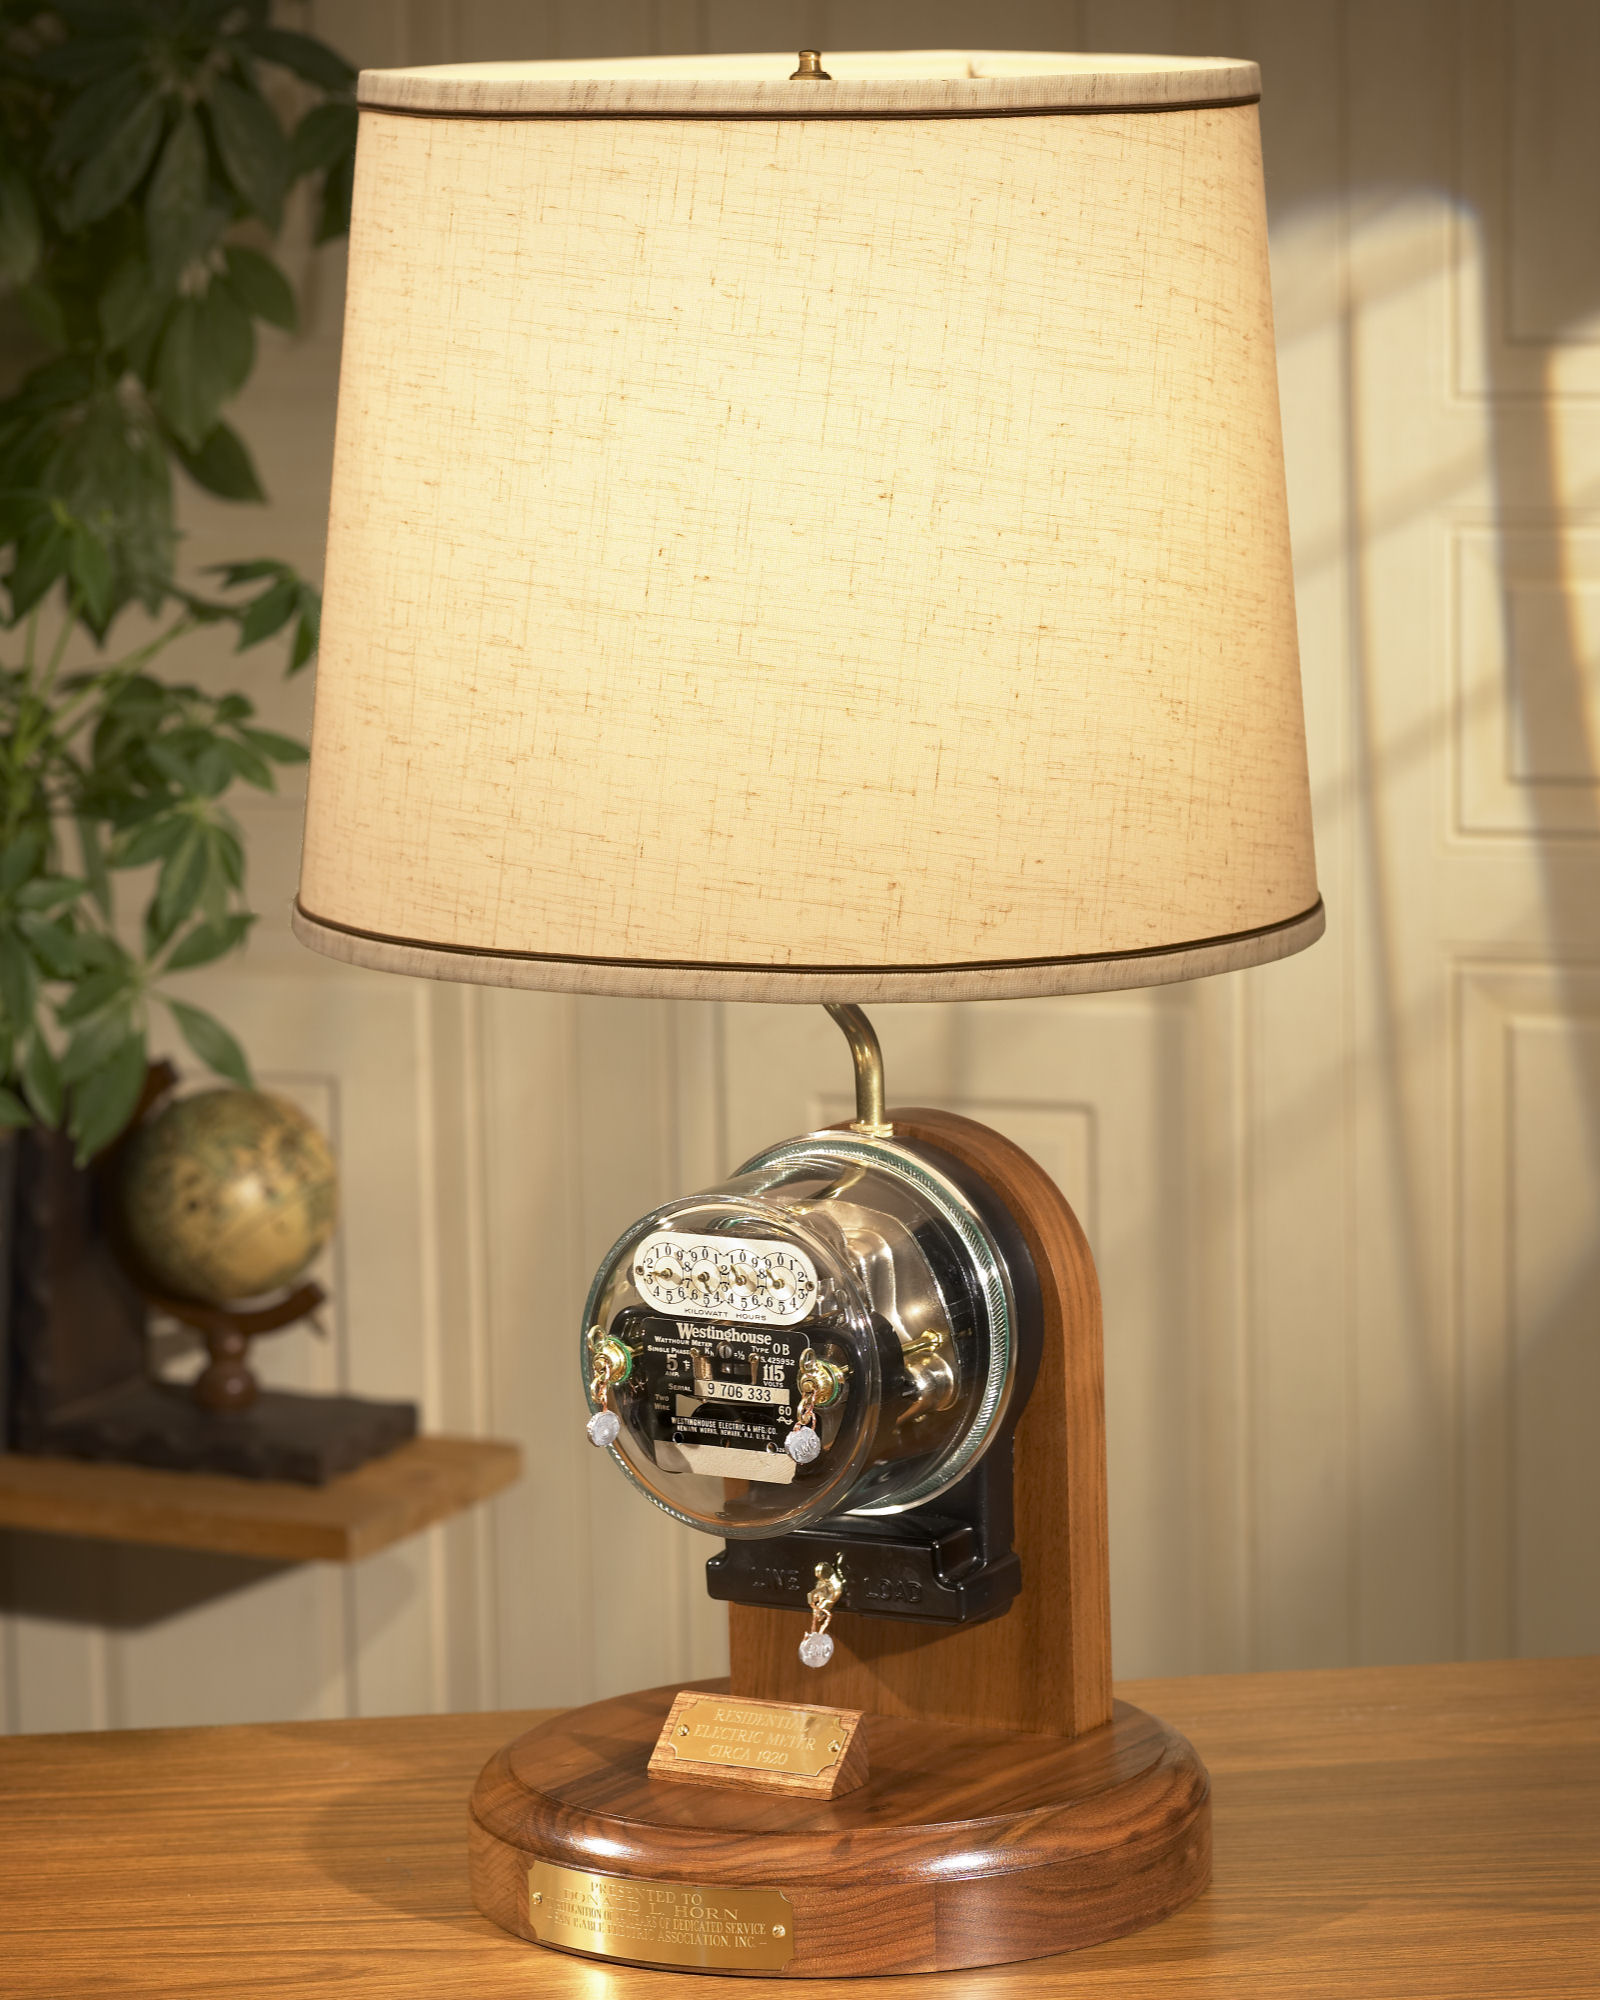 Heritage Residential Meter Lamp...traditional version. Deluxe is the same but with gold embellishments.